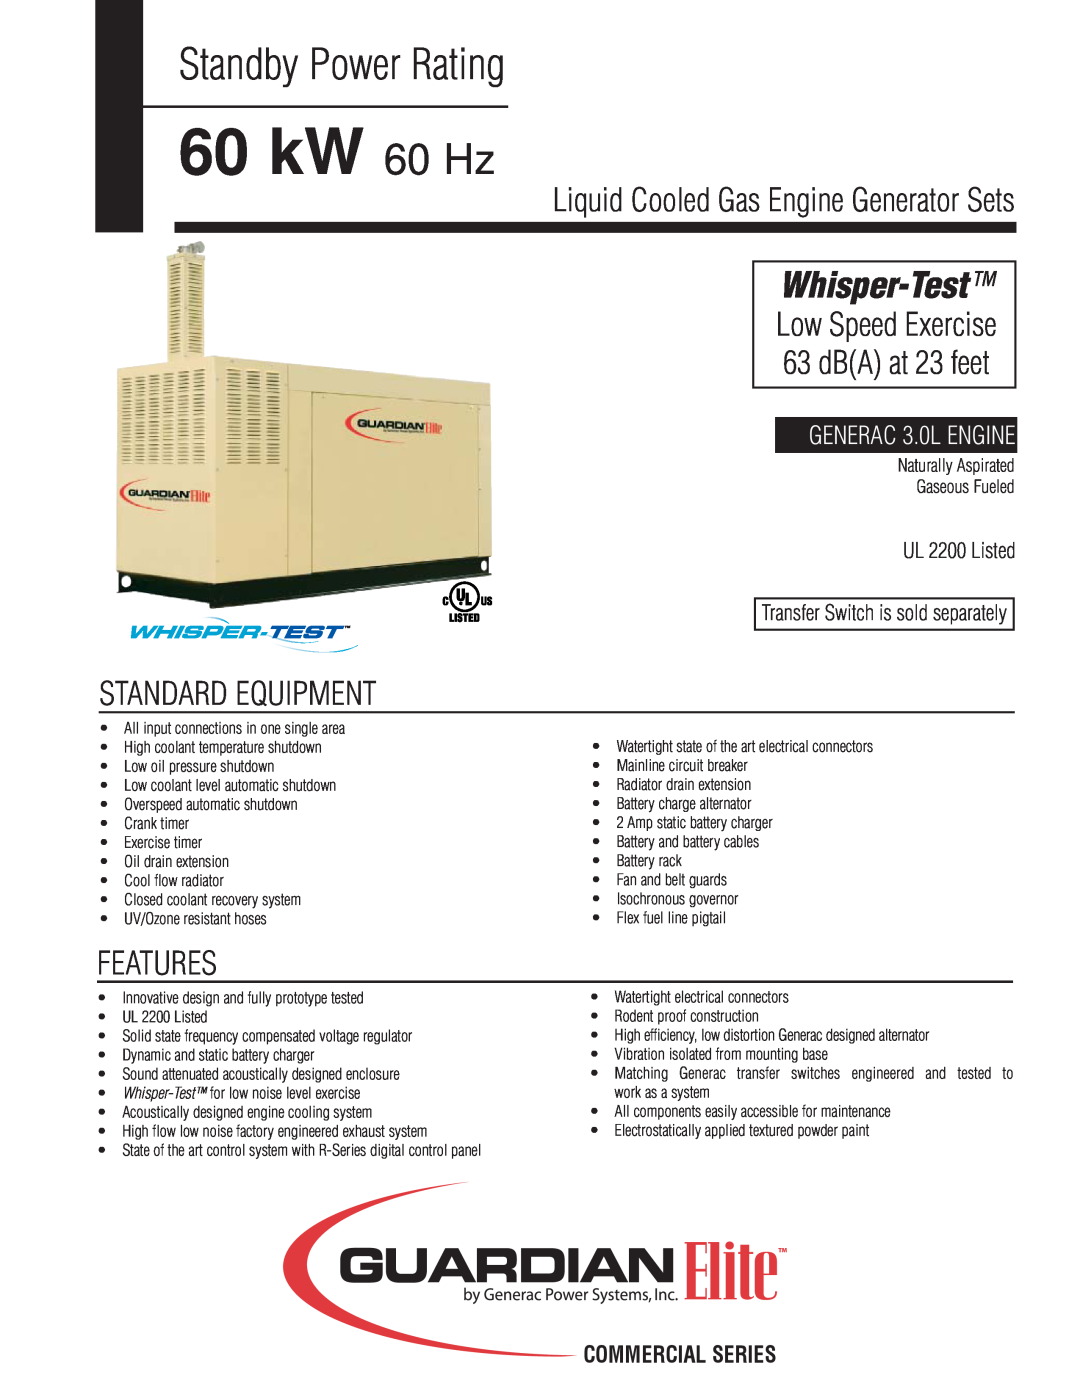 Generac Power Systems COMMERCIAL SERIES manual Standby Power Rating, 60 kW 60 Hz, Whisper-Test, Standard Equipment 